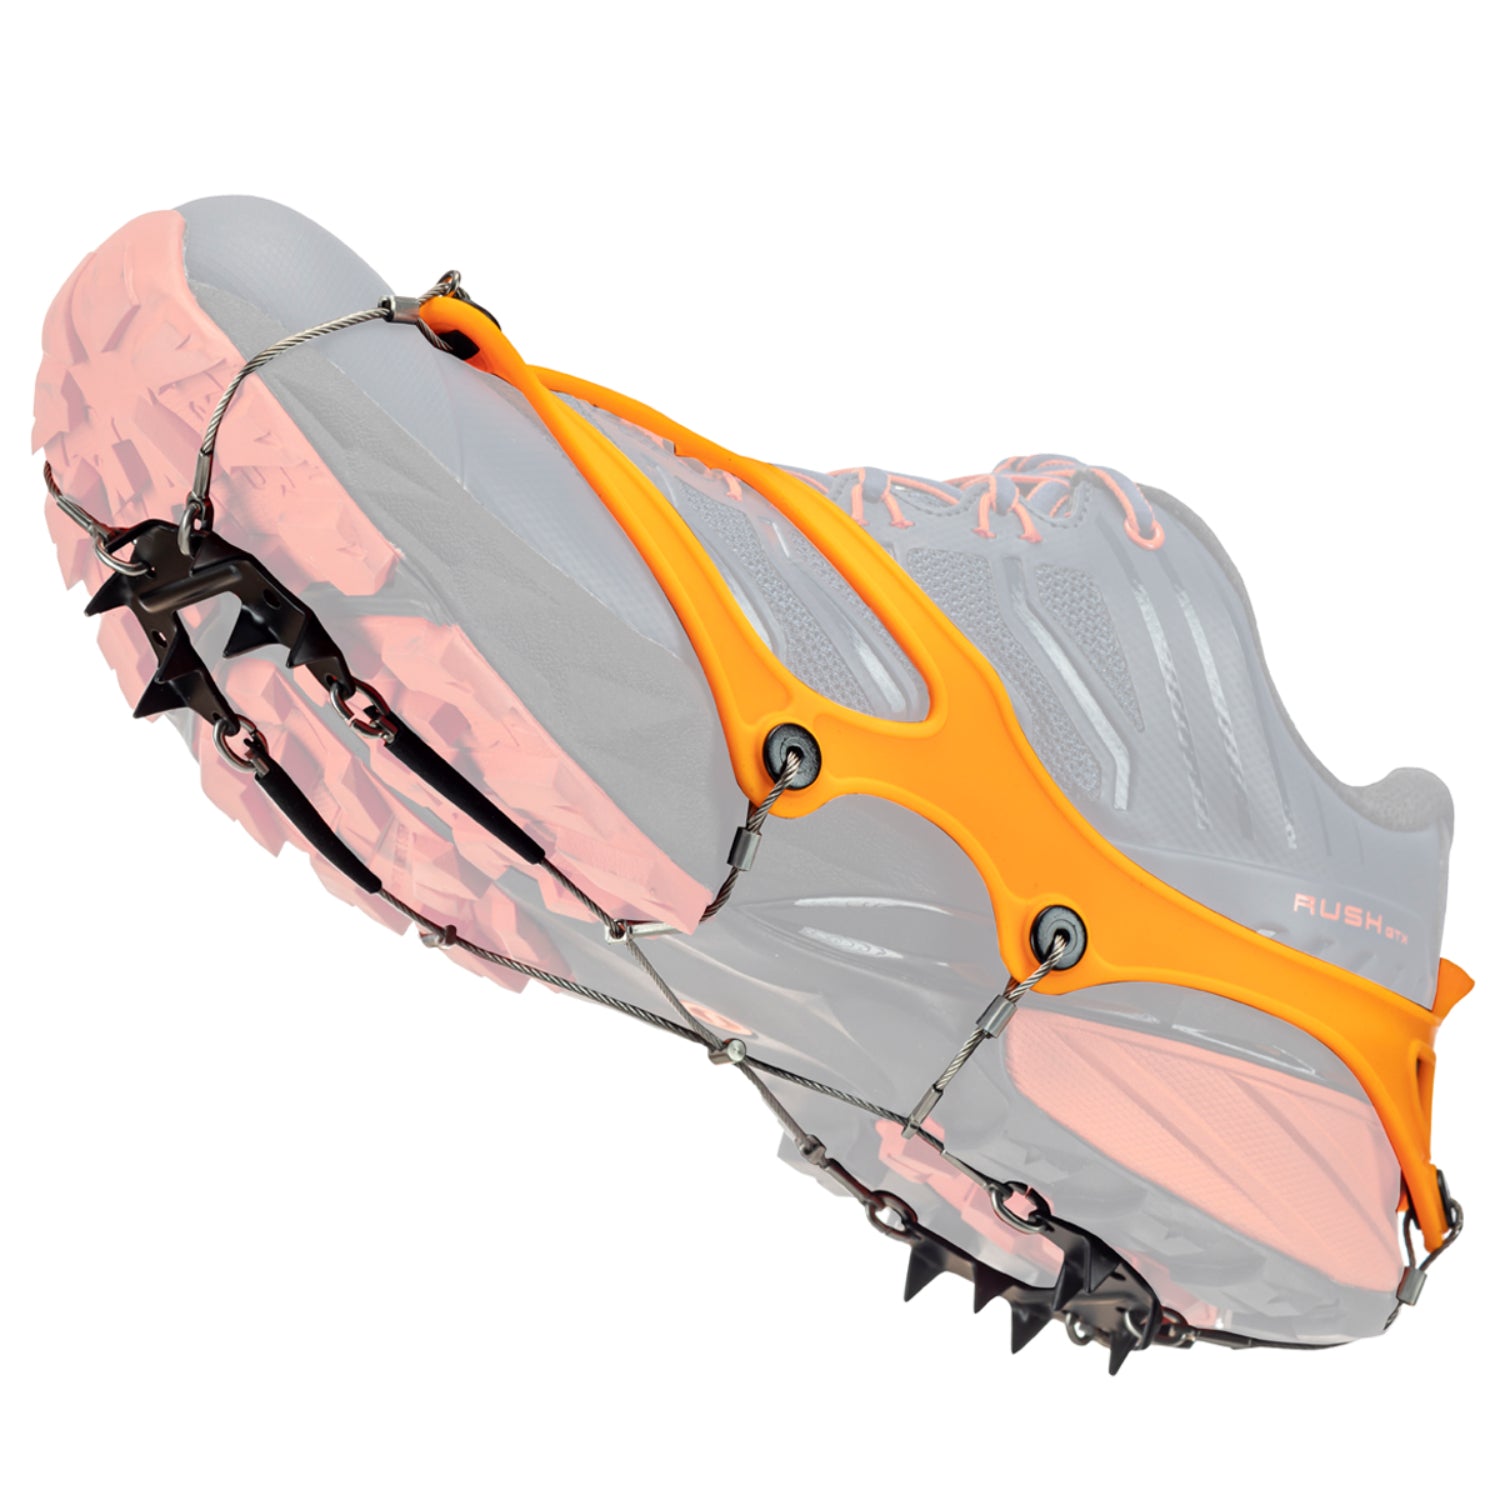 Nortec Trail 2.1 Spikes